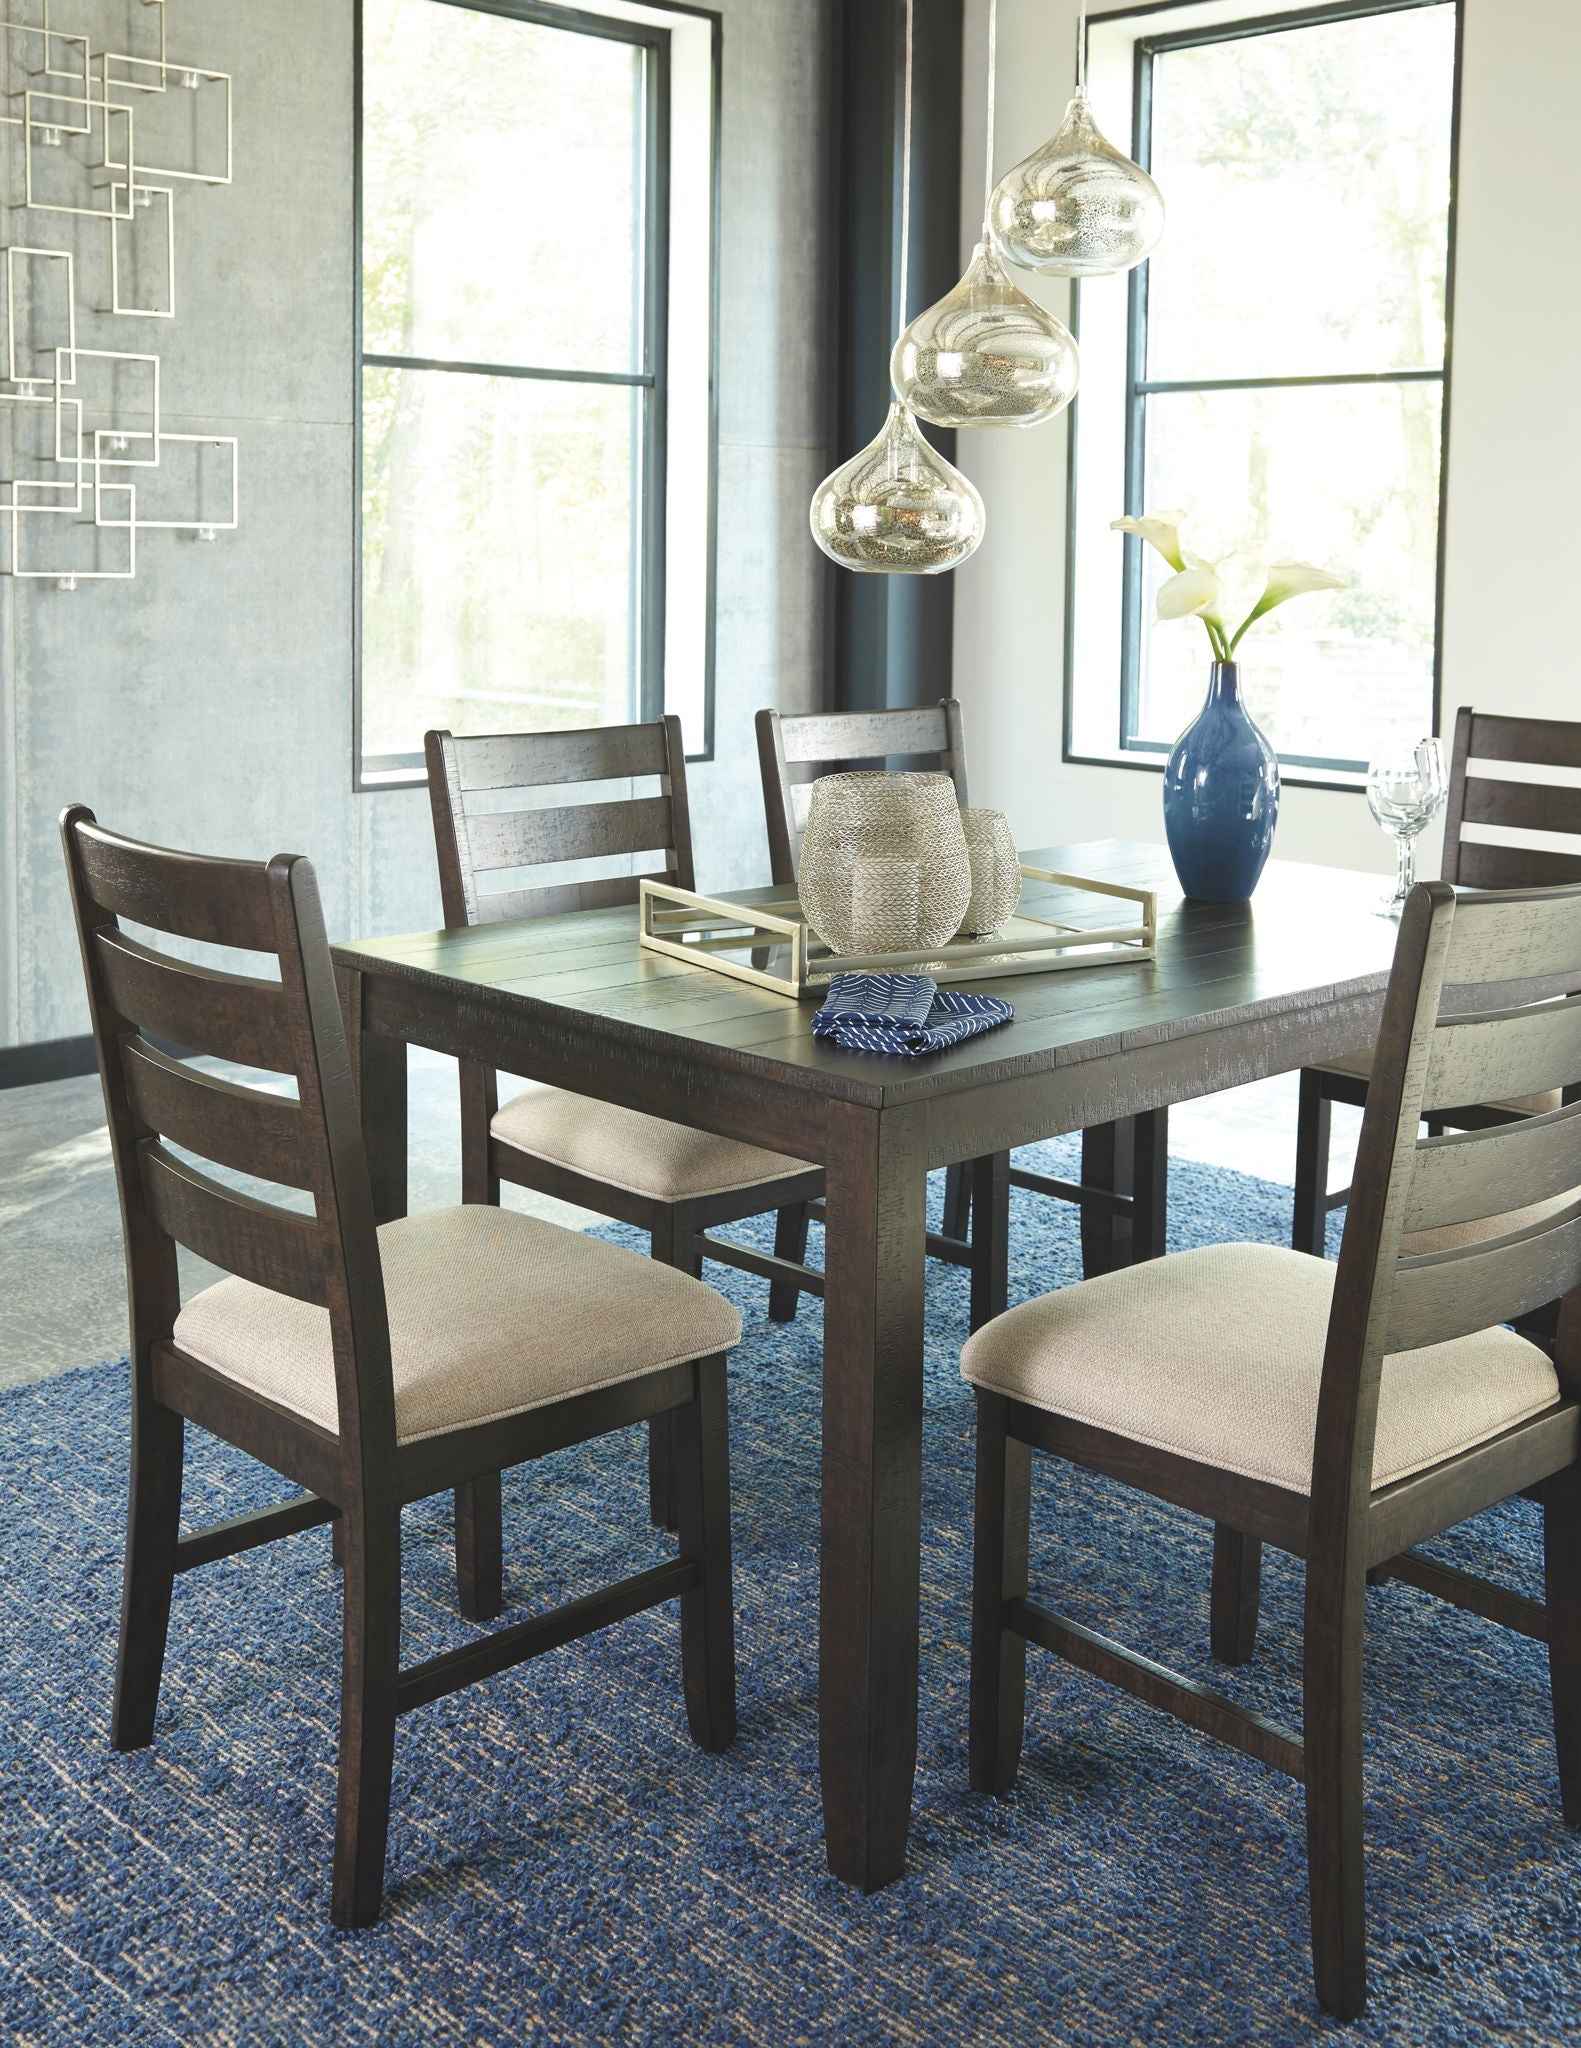 Rokane Dining Room Table and Chairs (Set of 7)